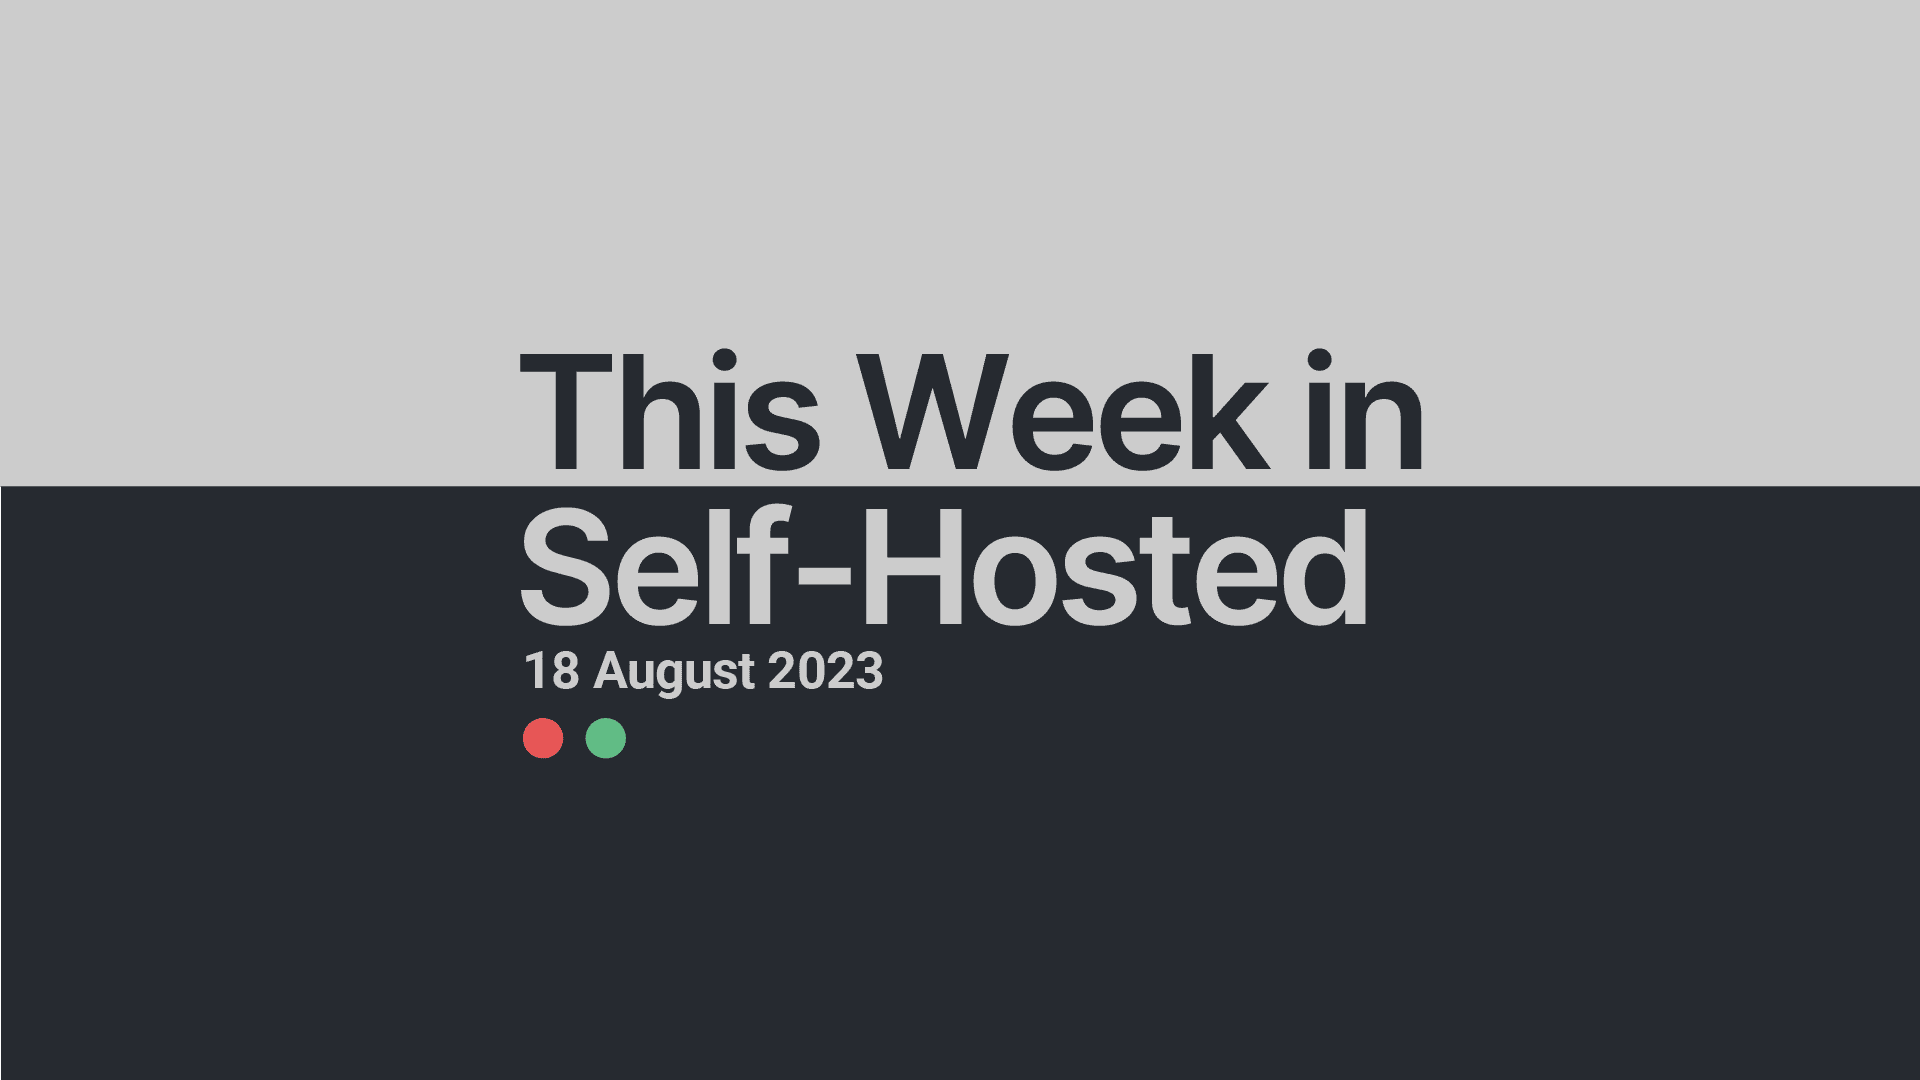 This Week in Self-Hosted (18 August 2023) Post image